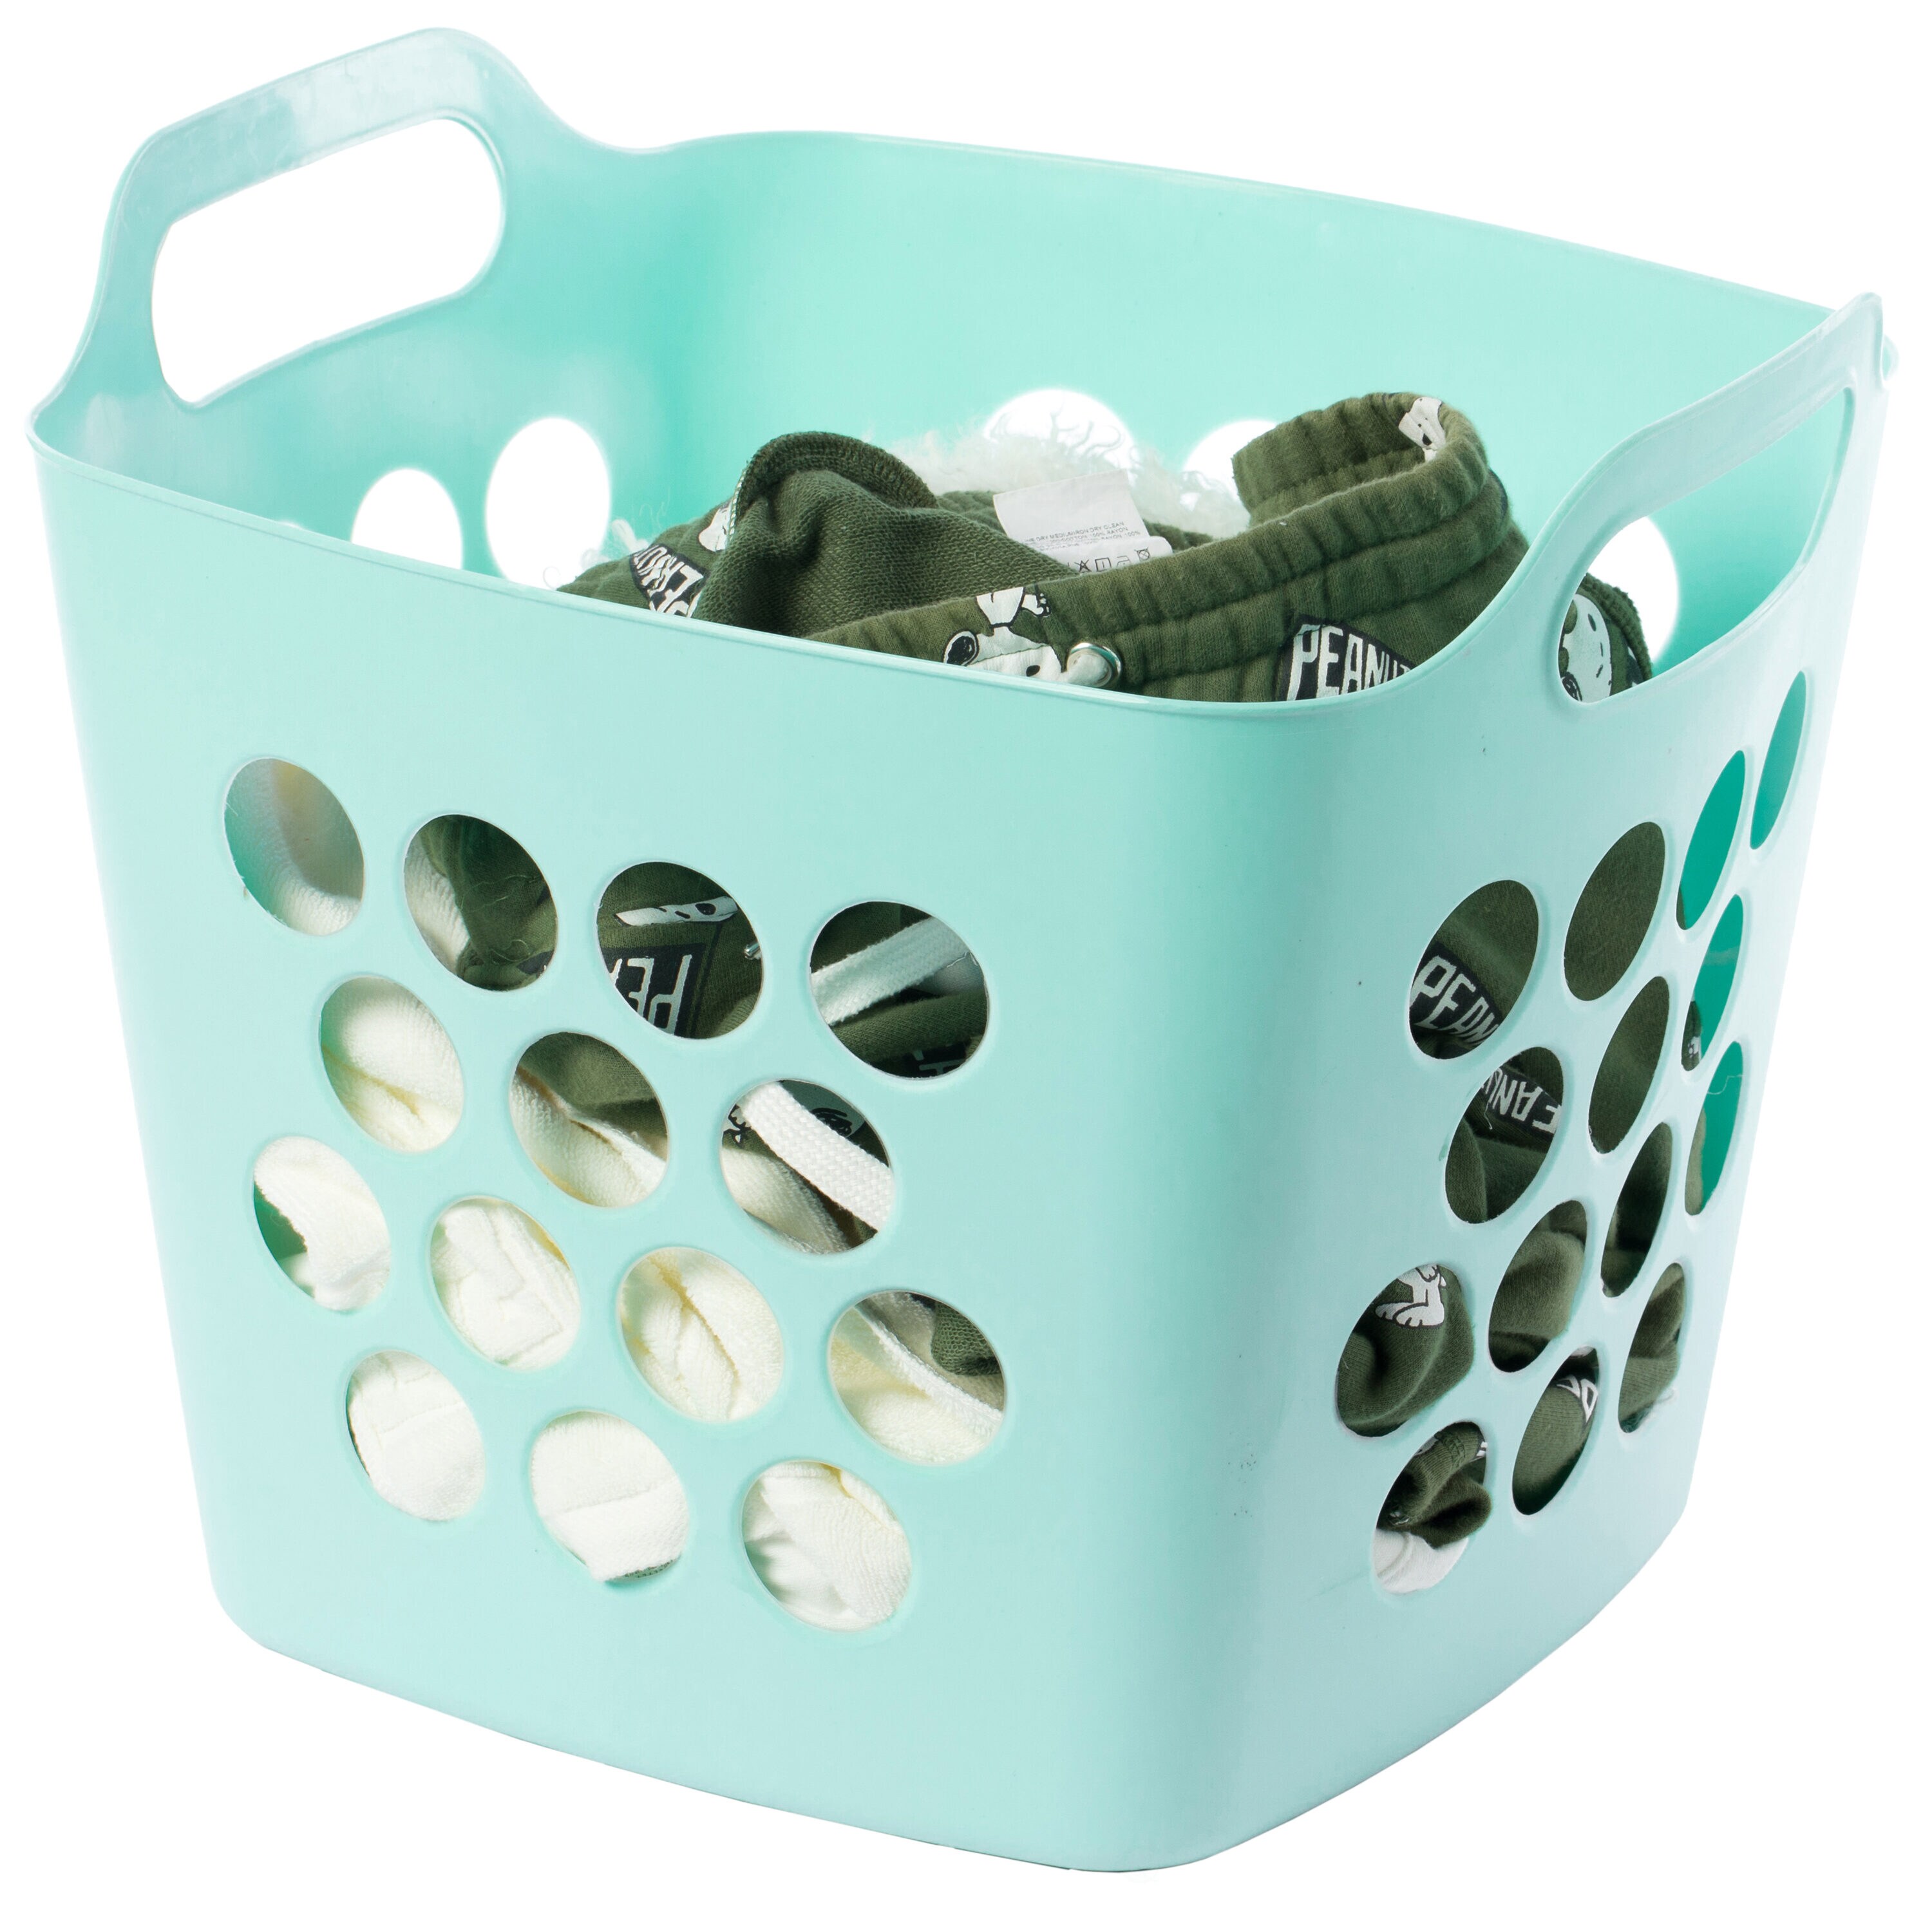 Plus One Plastic Basket, For Kitchen, Size: 25 X 15 Inch at Rs 106